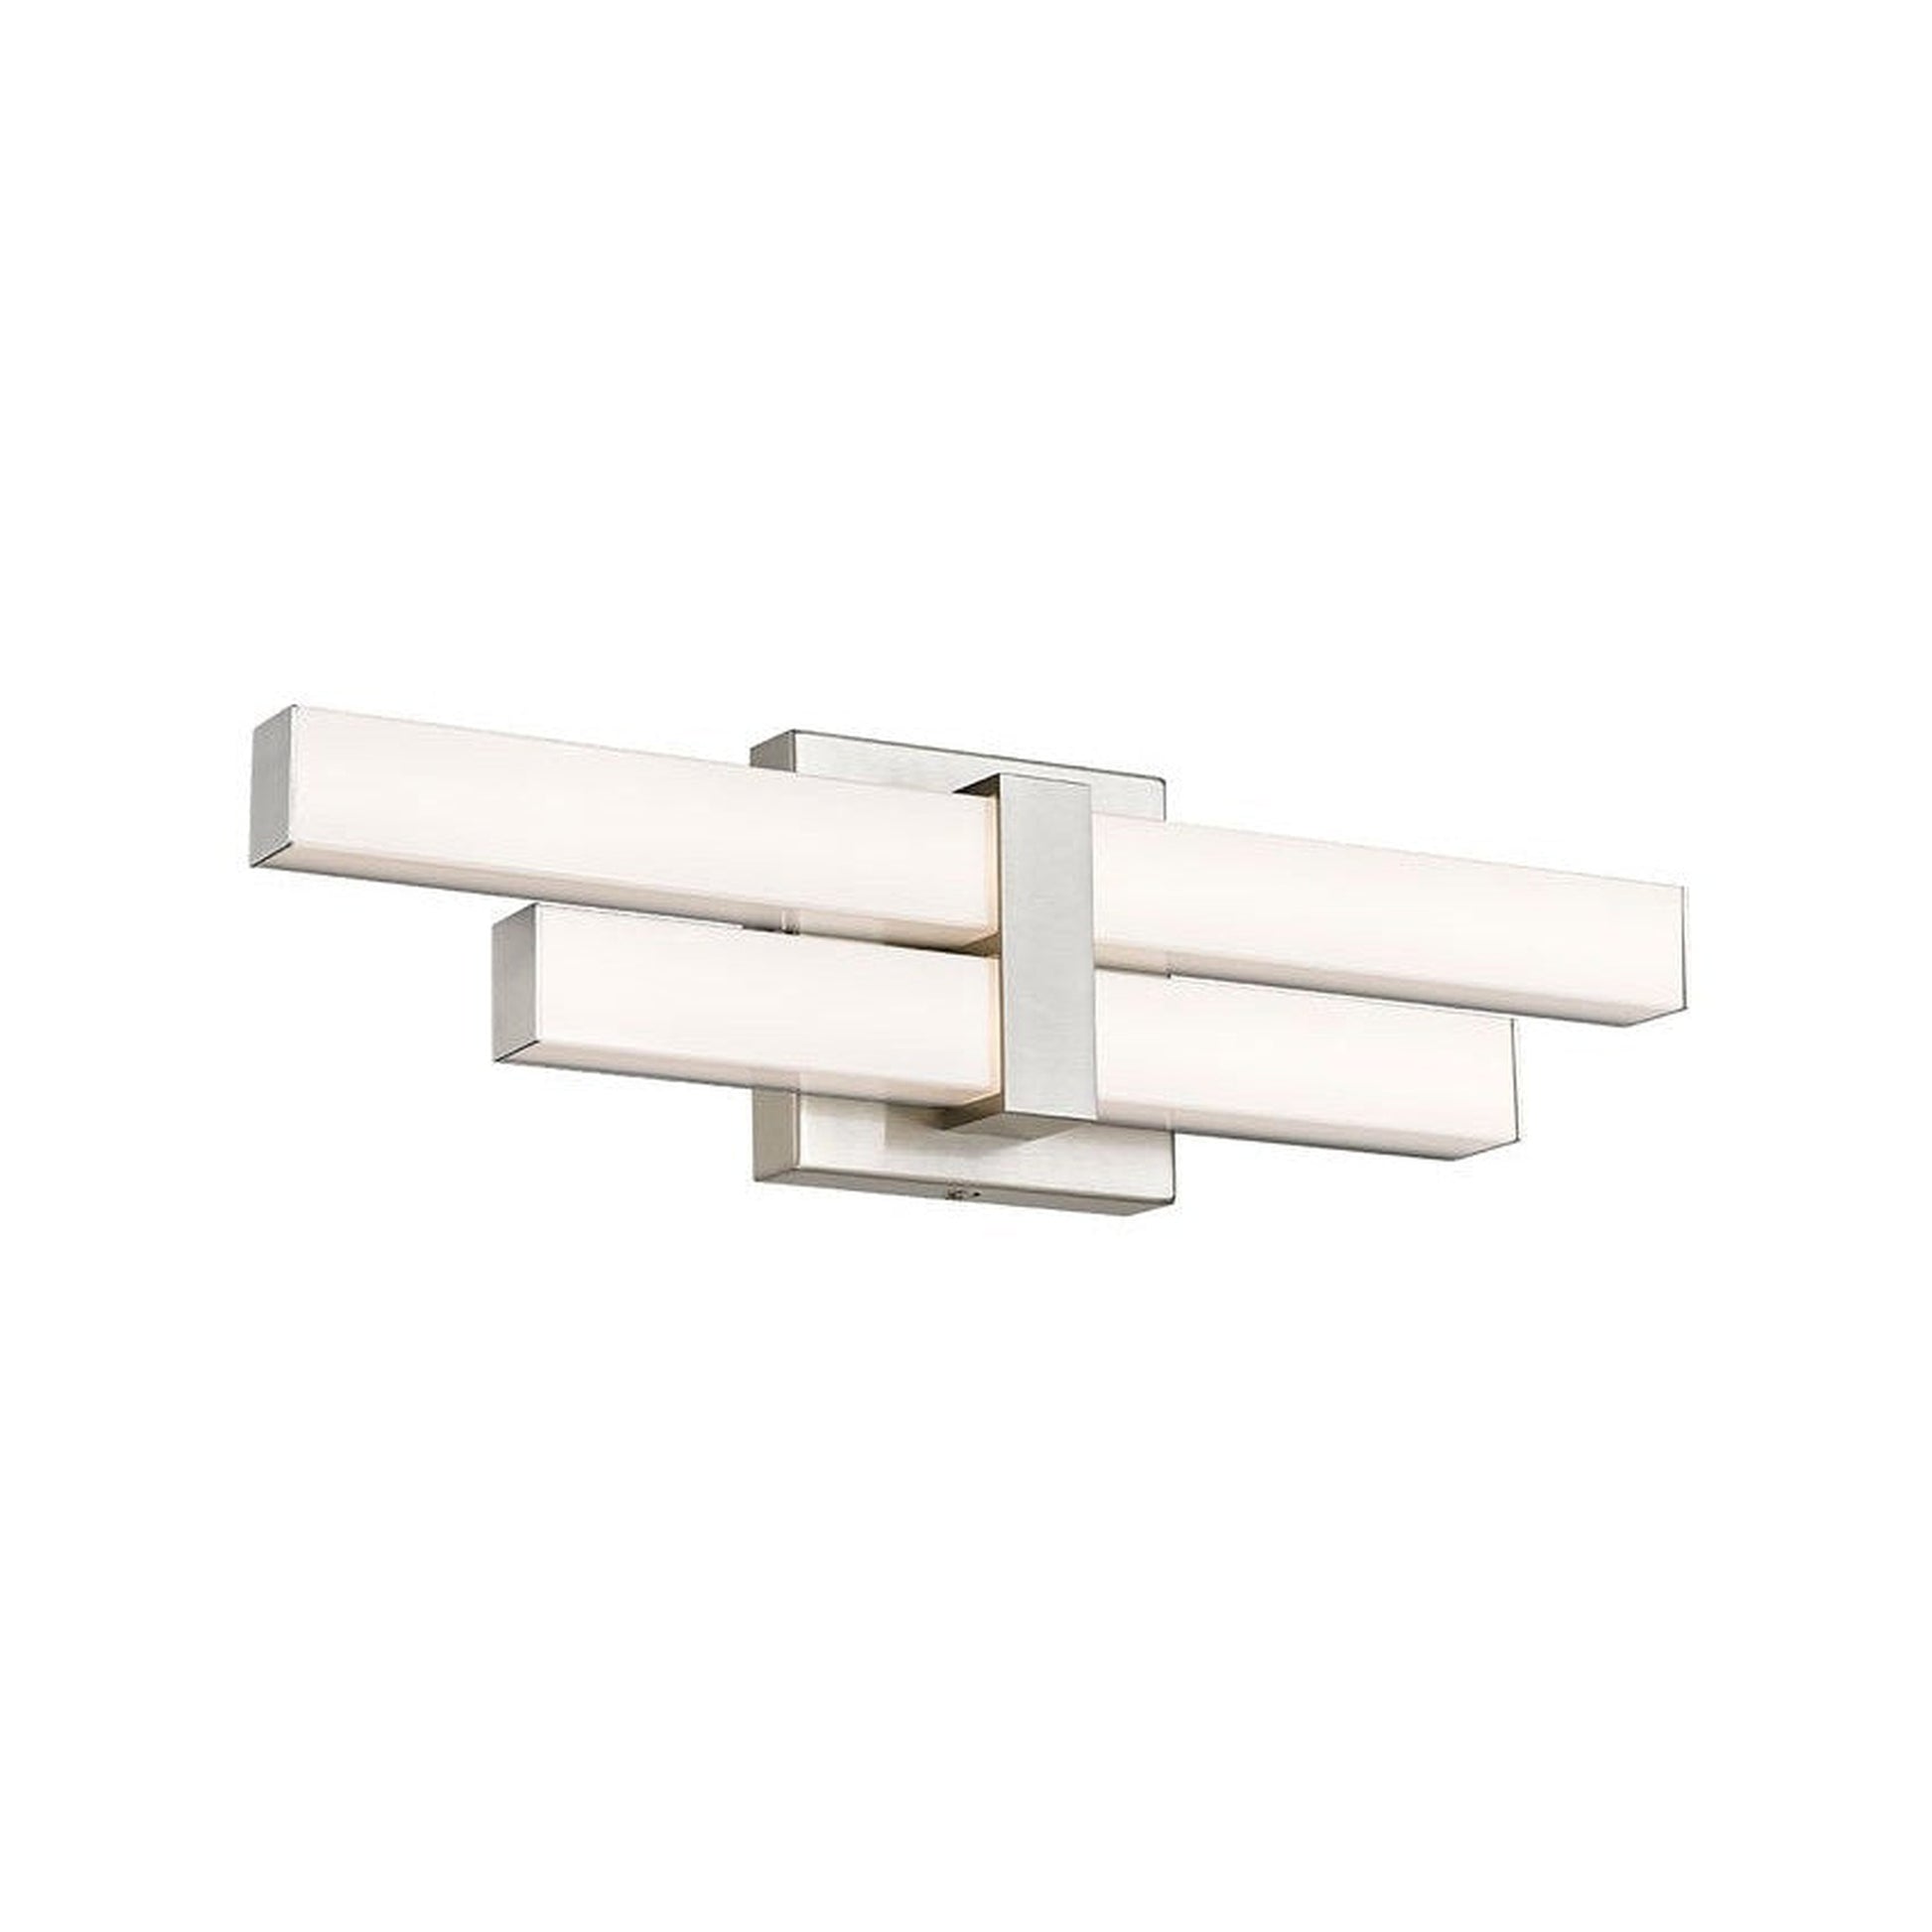 Z-Lite Zane 18" 2-Light LED Brushed Nickel and Frosted Shade Vanity Light